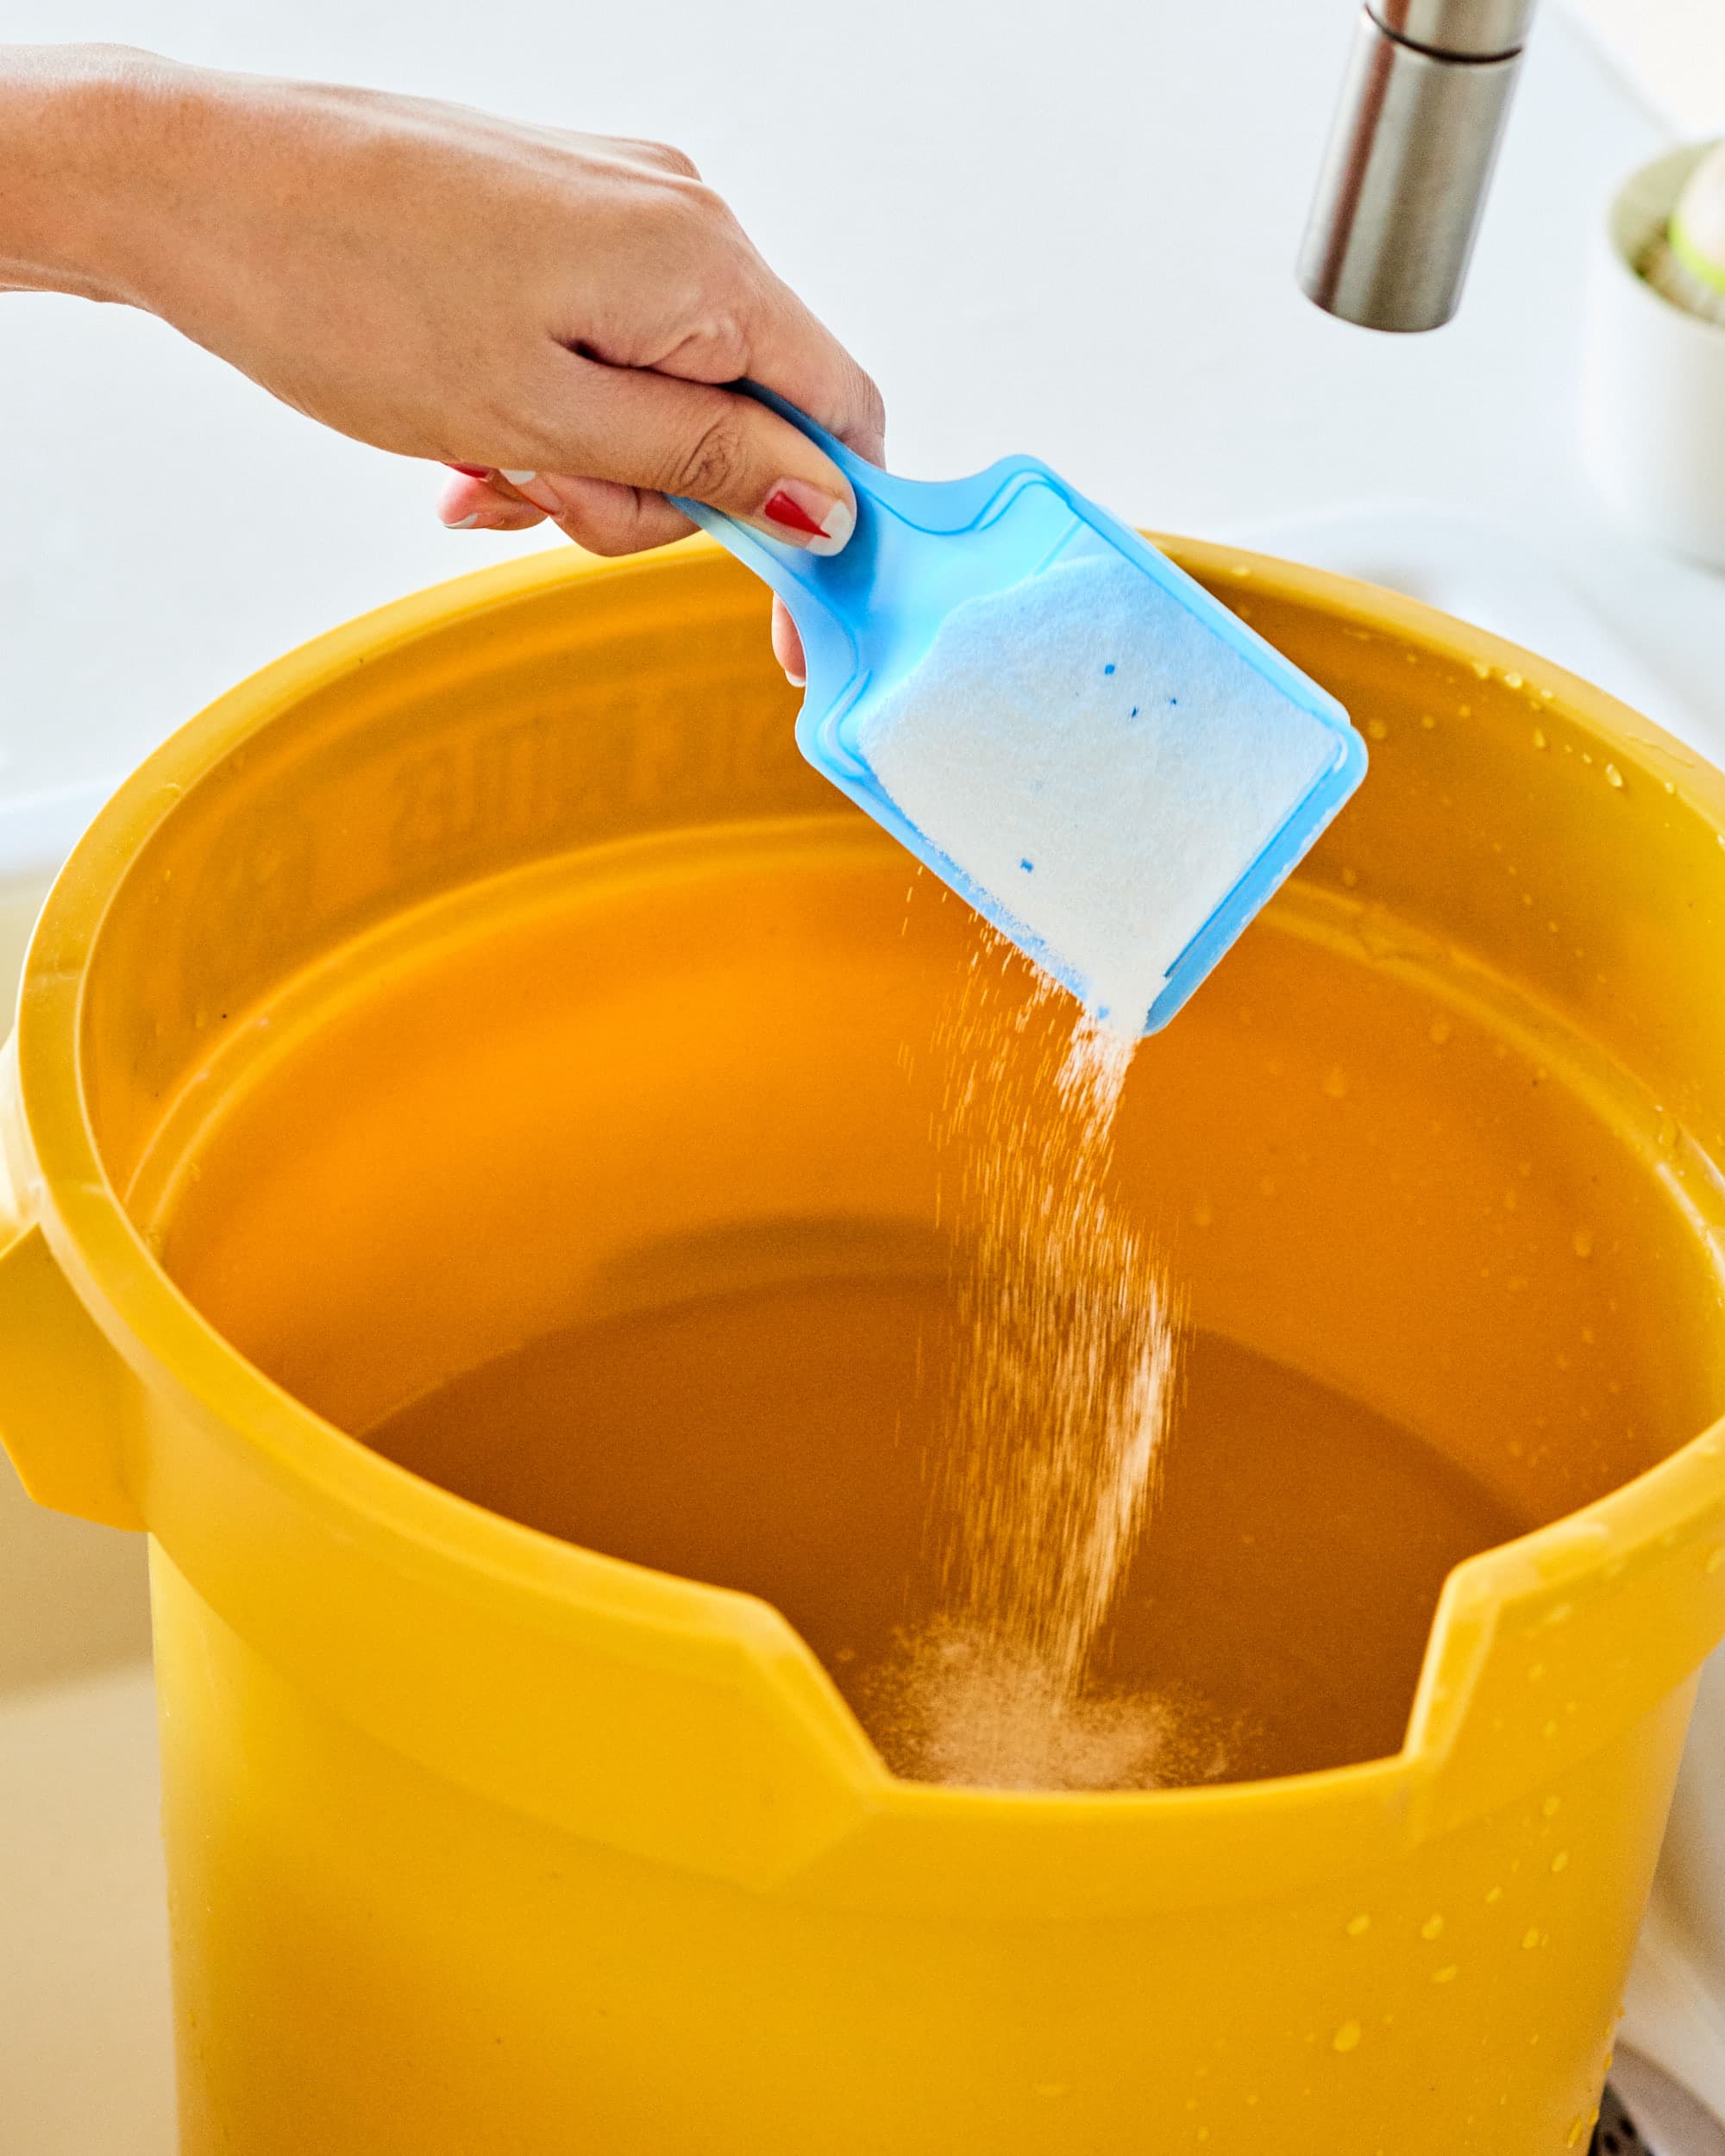 How to Mop Your Floors Using Laundry Detergent